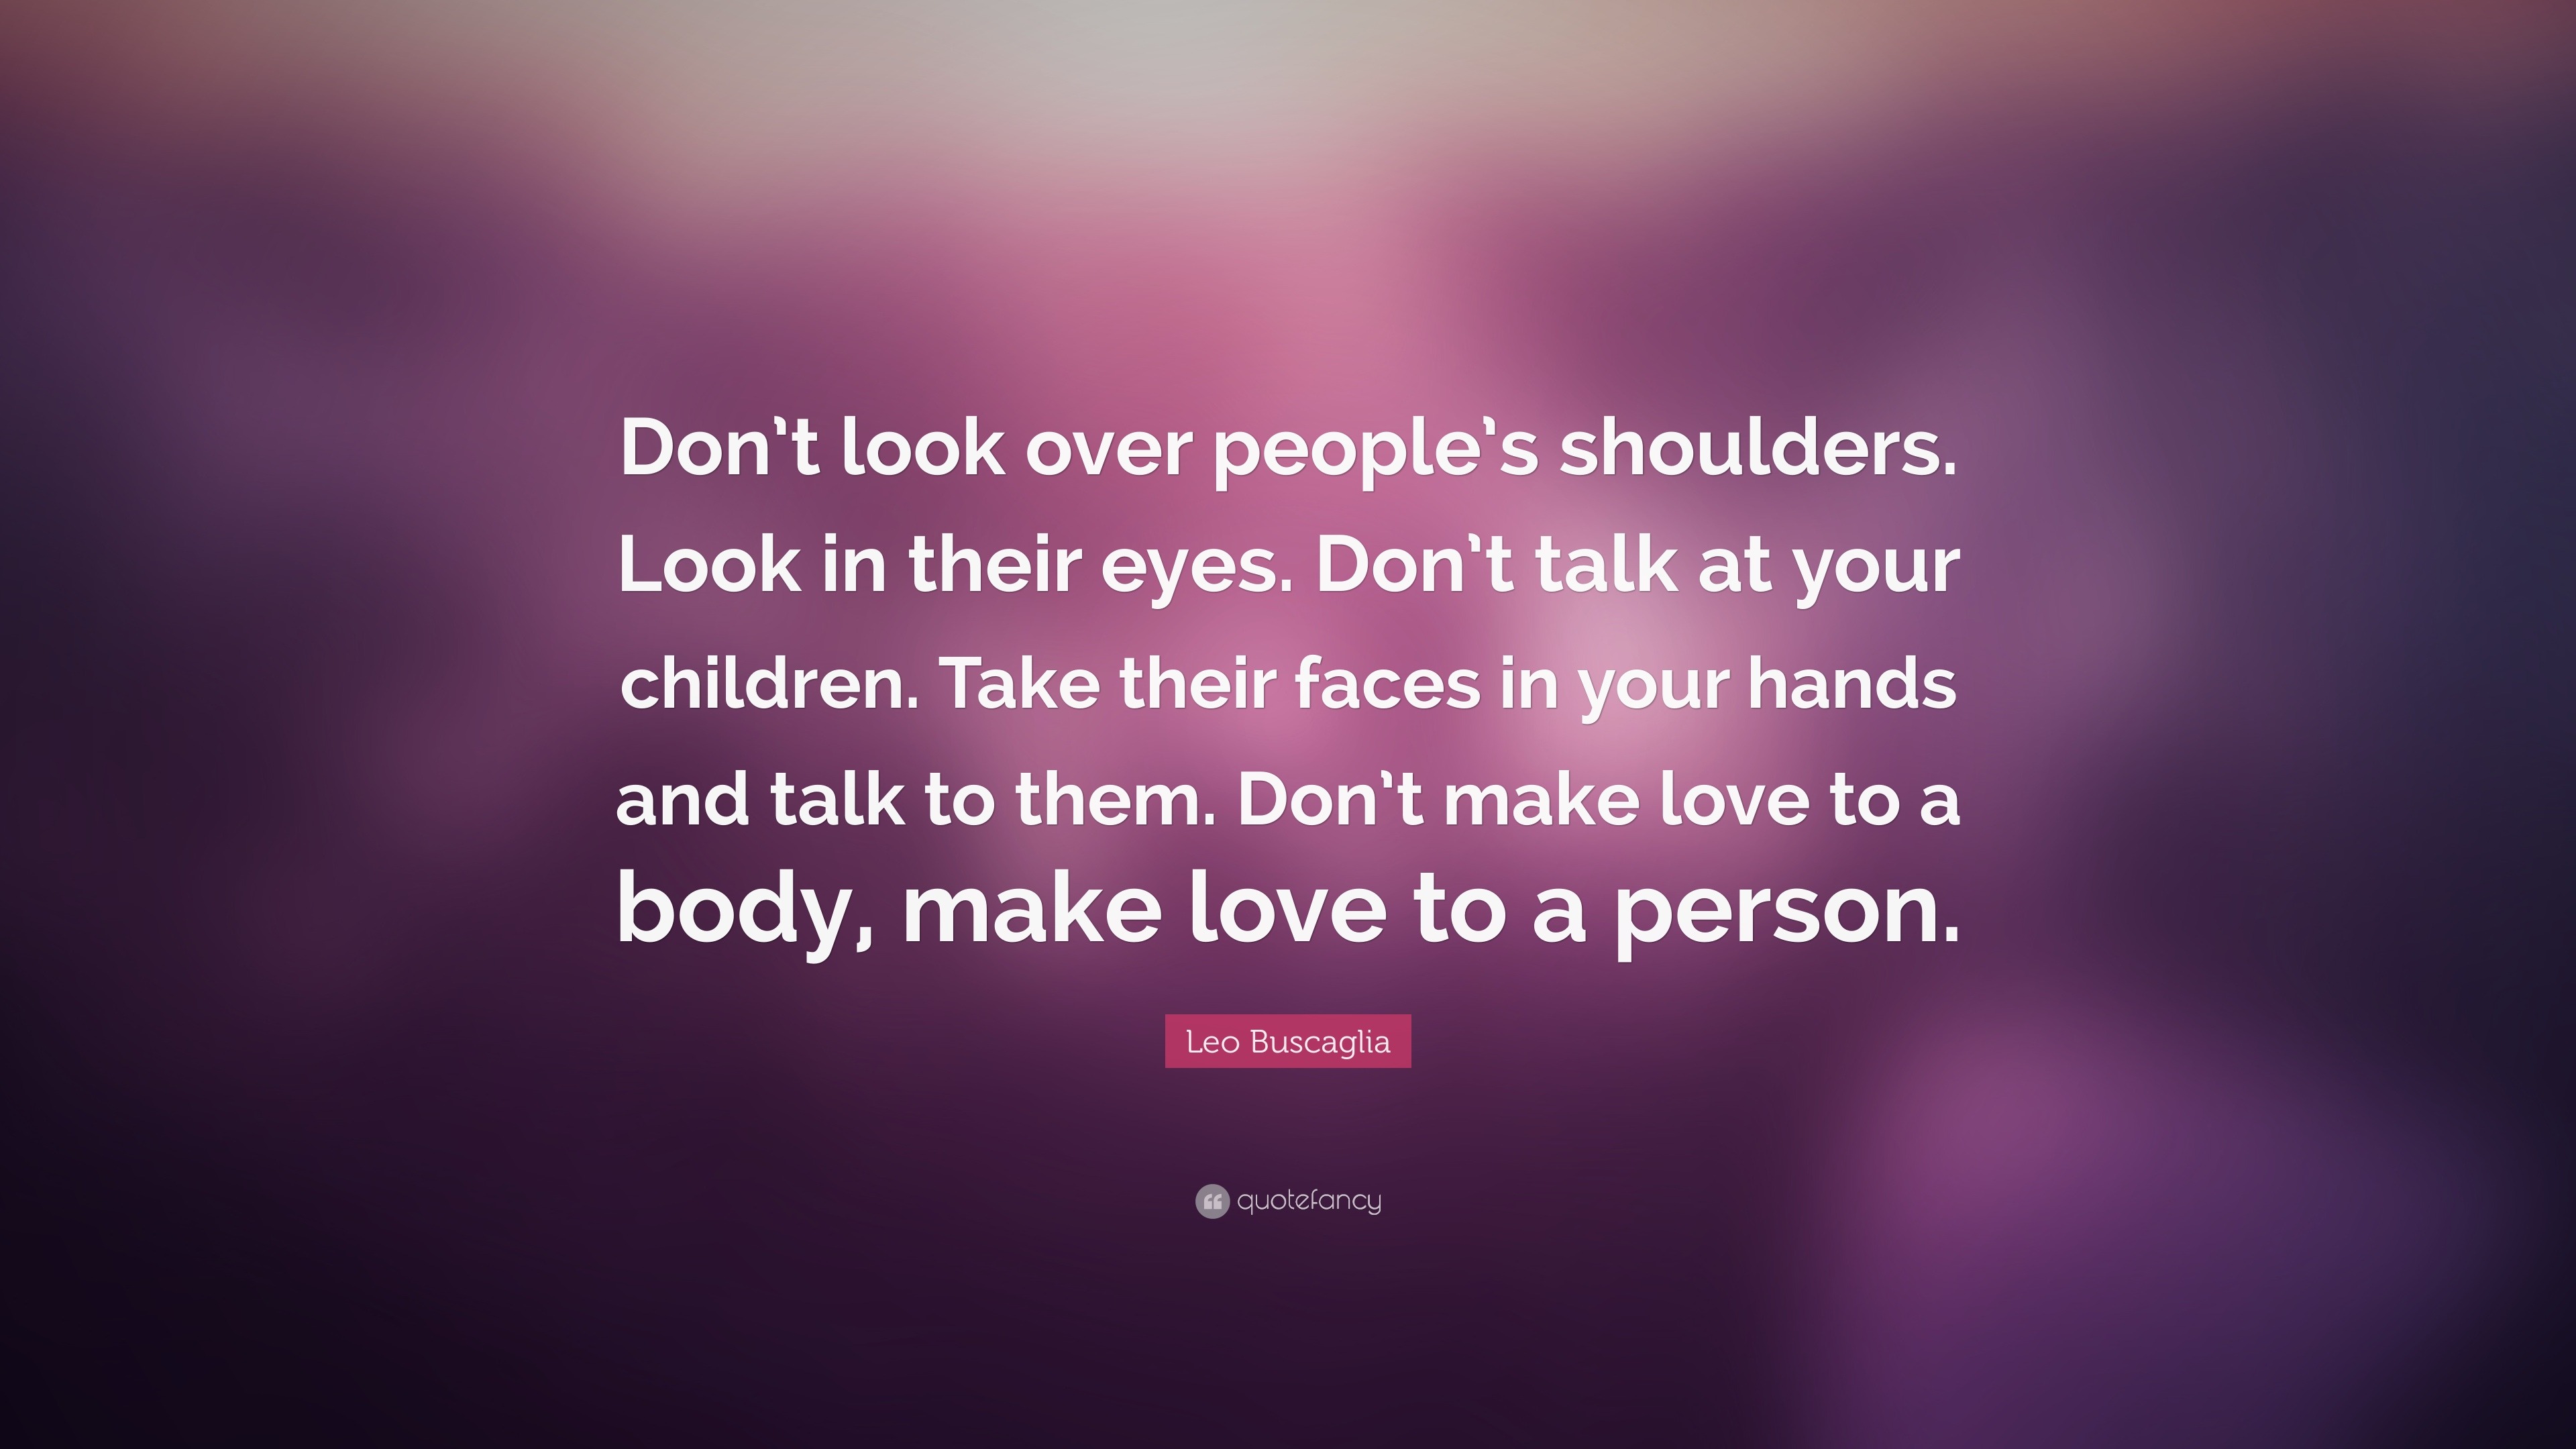 Leo Buscaglia Quote “Don t look over people s shoulders Look in their